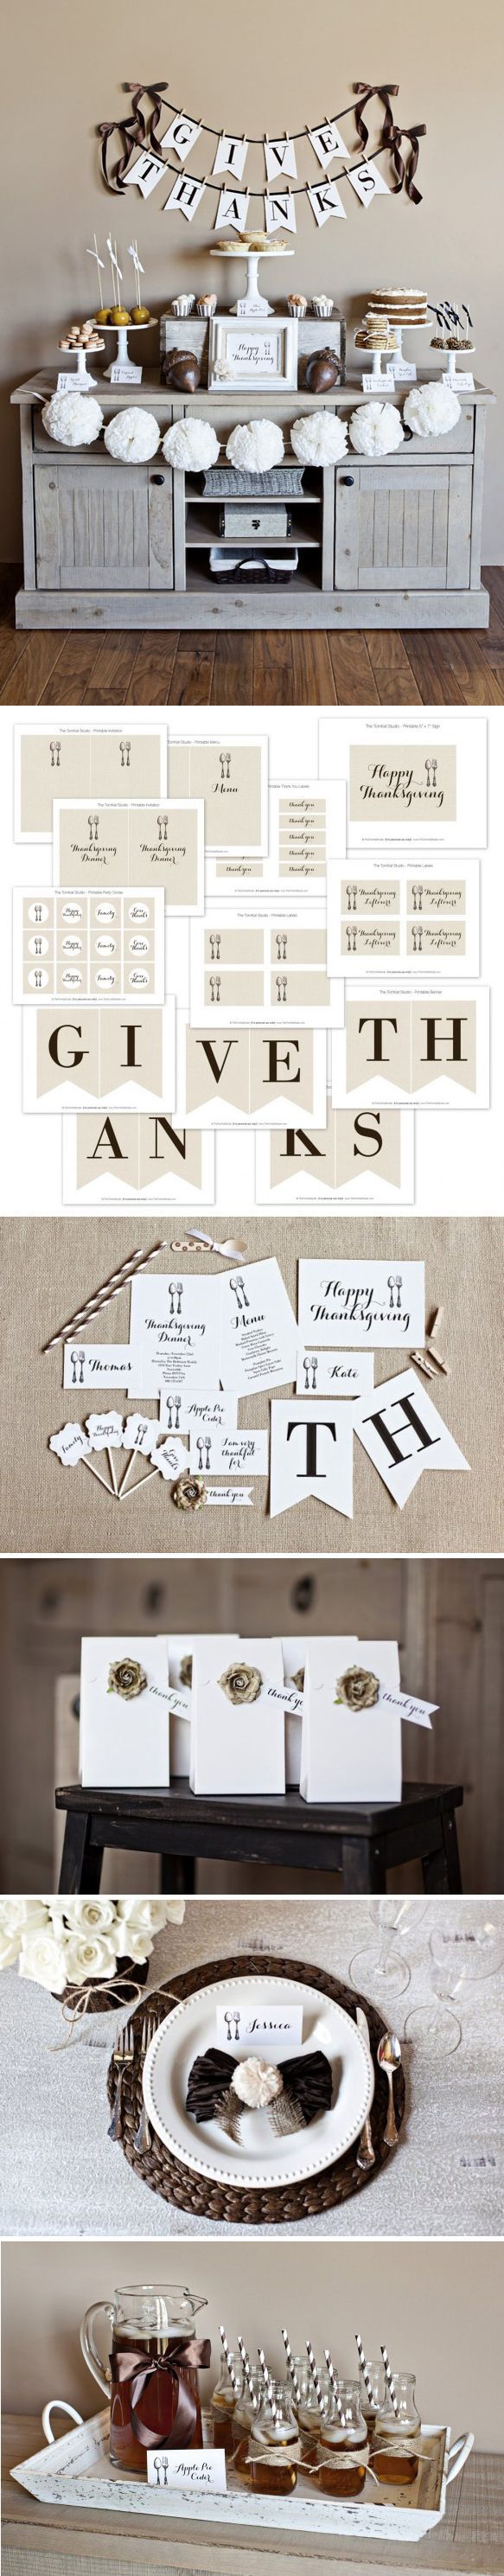 GiveThanks Collection 2012 – free printables from TheTomkat Studio www.thetomkatst